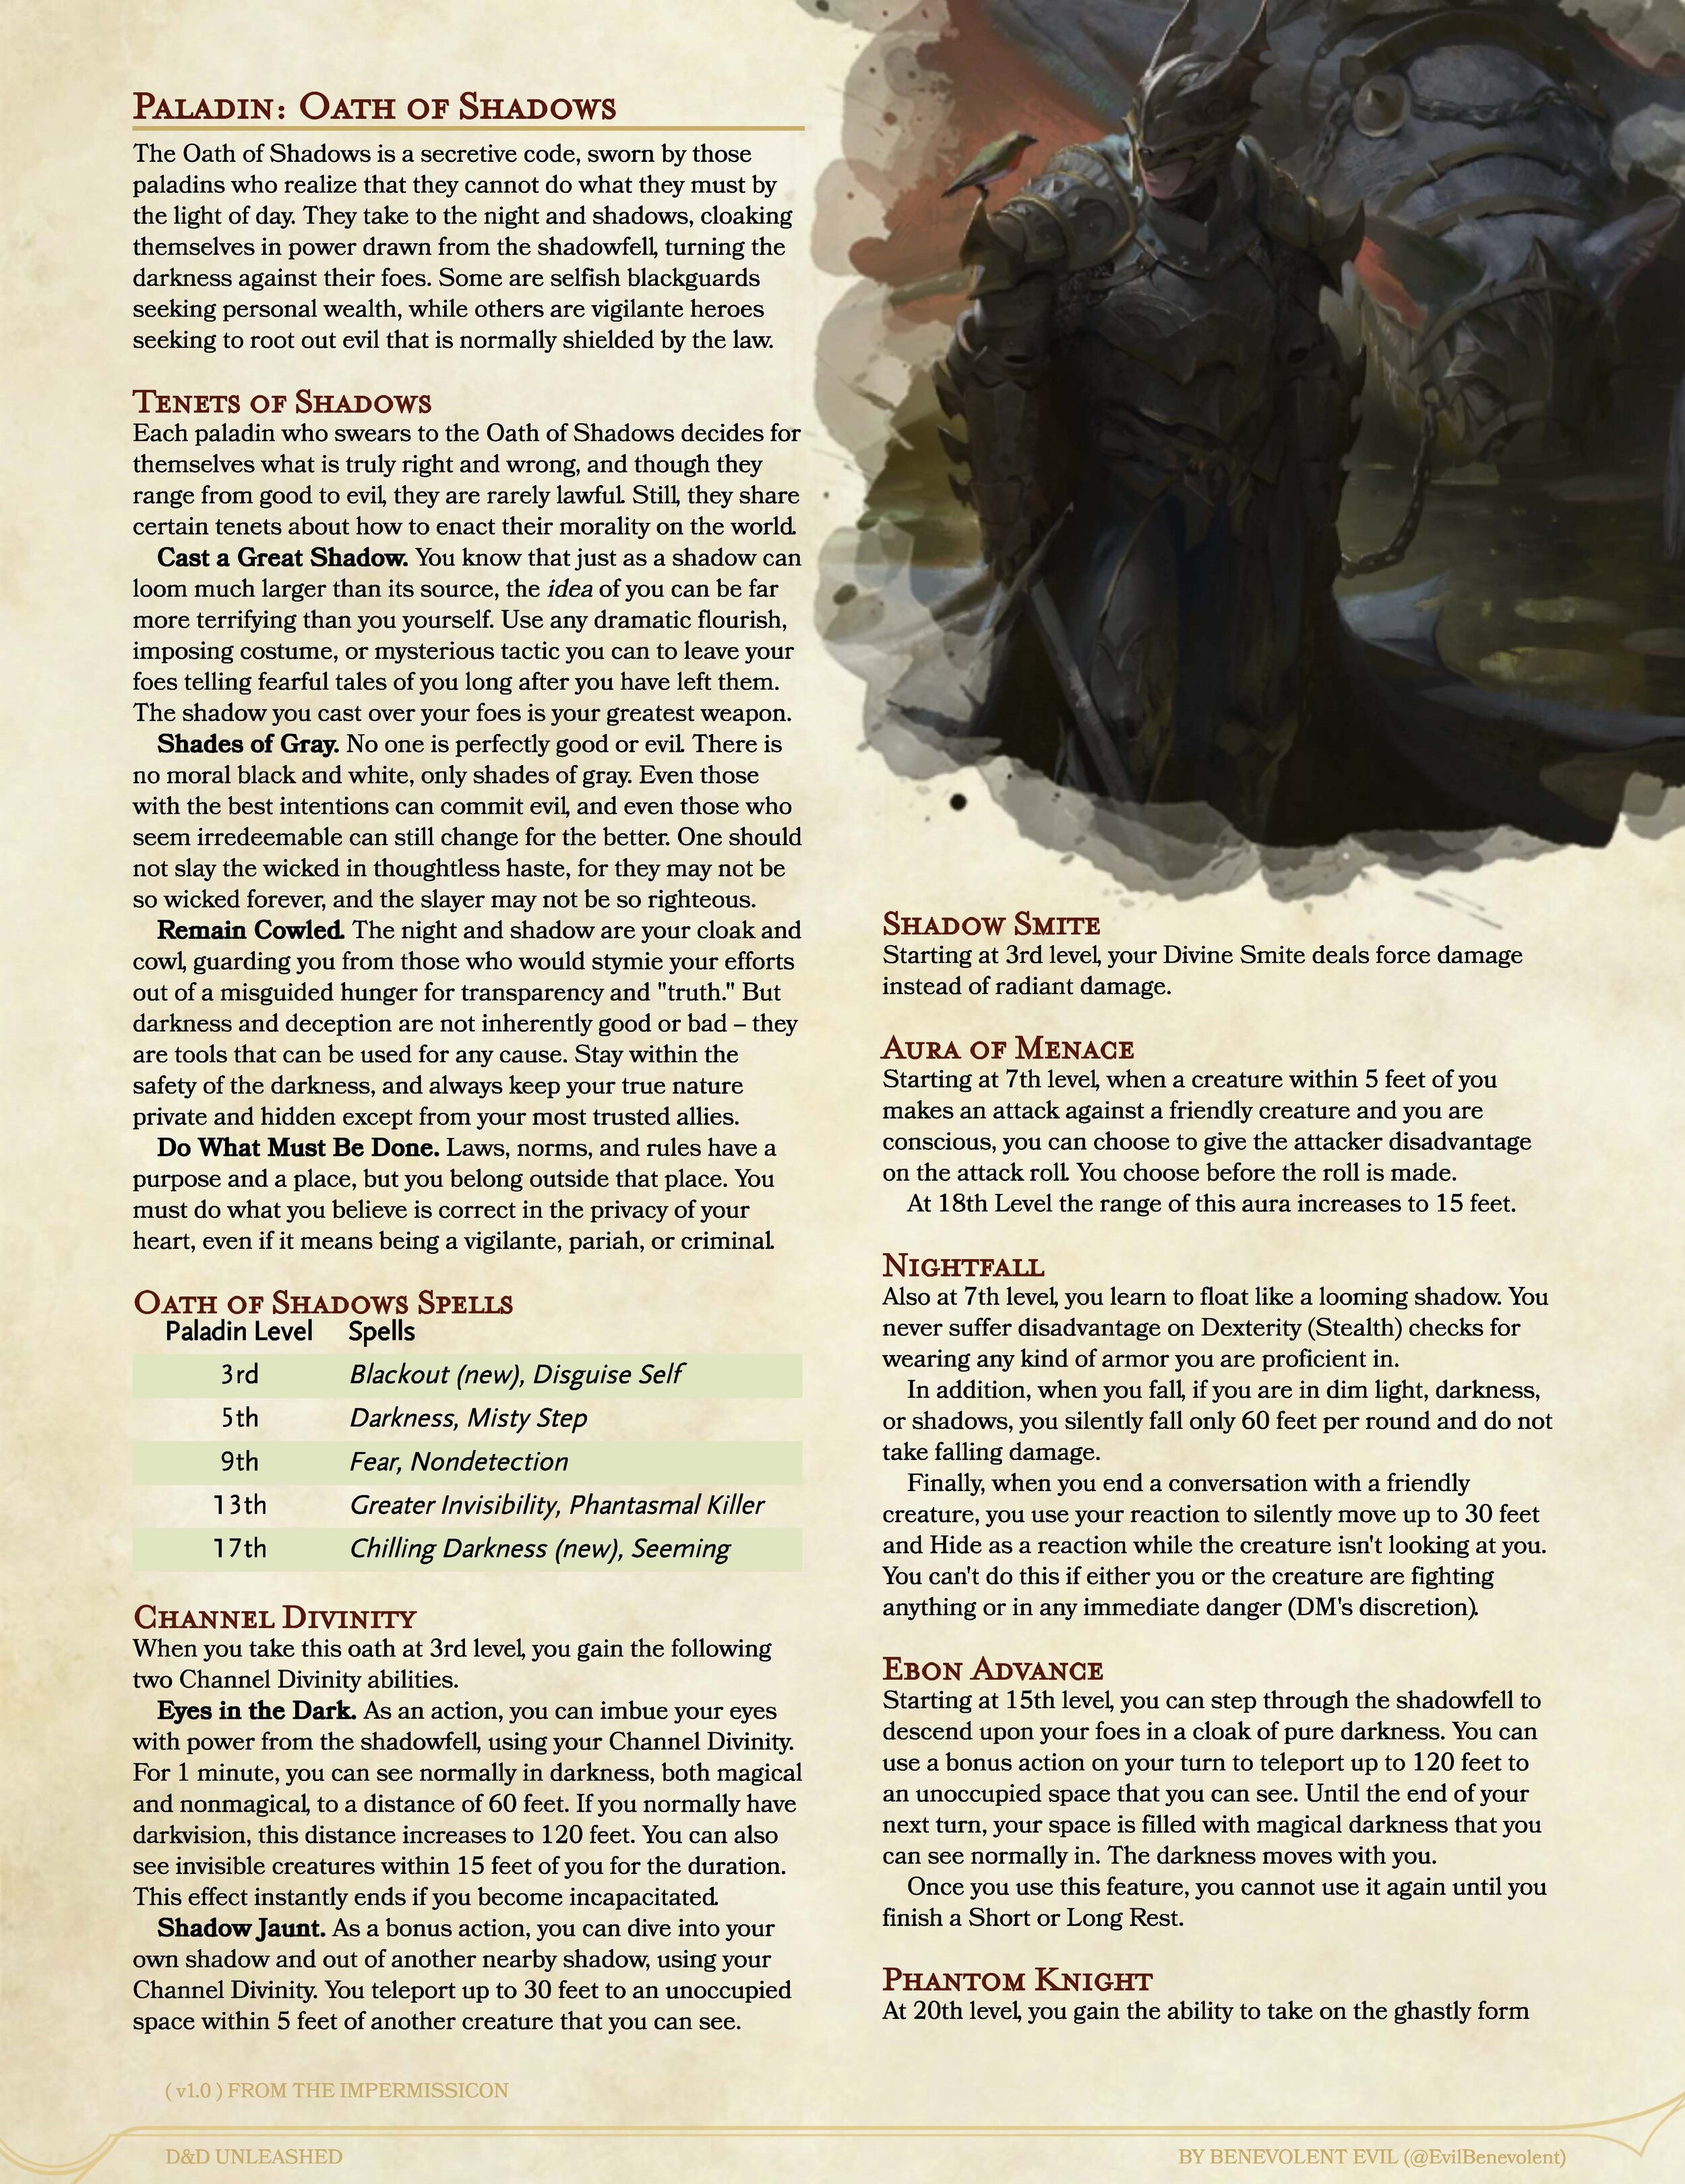 D&D Unleashed - The Oath of Shadows Paladin (1p0)_Page_1.jpg